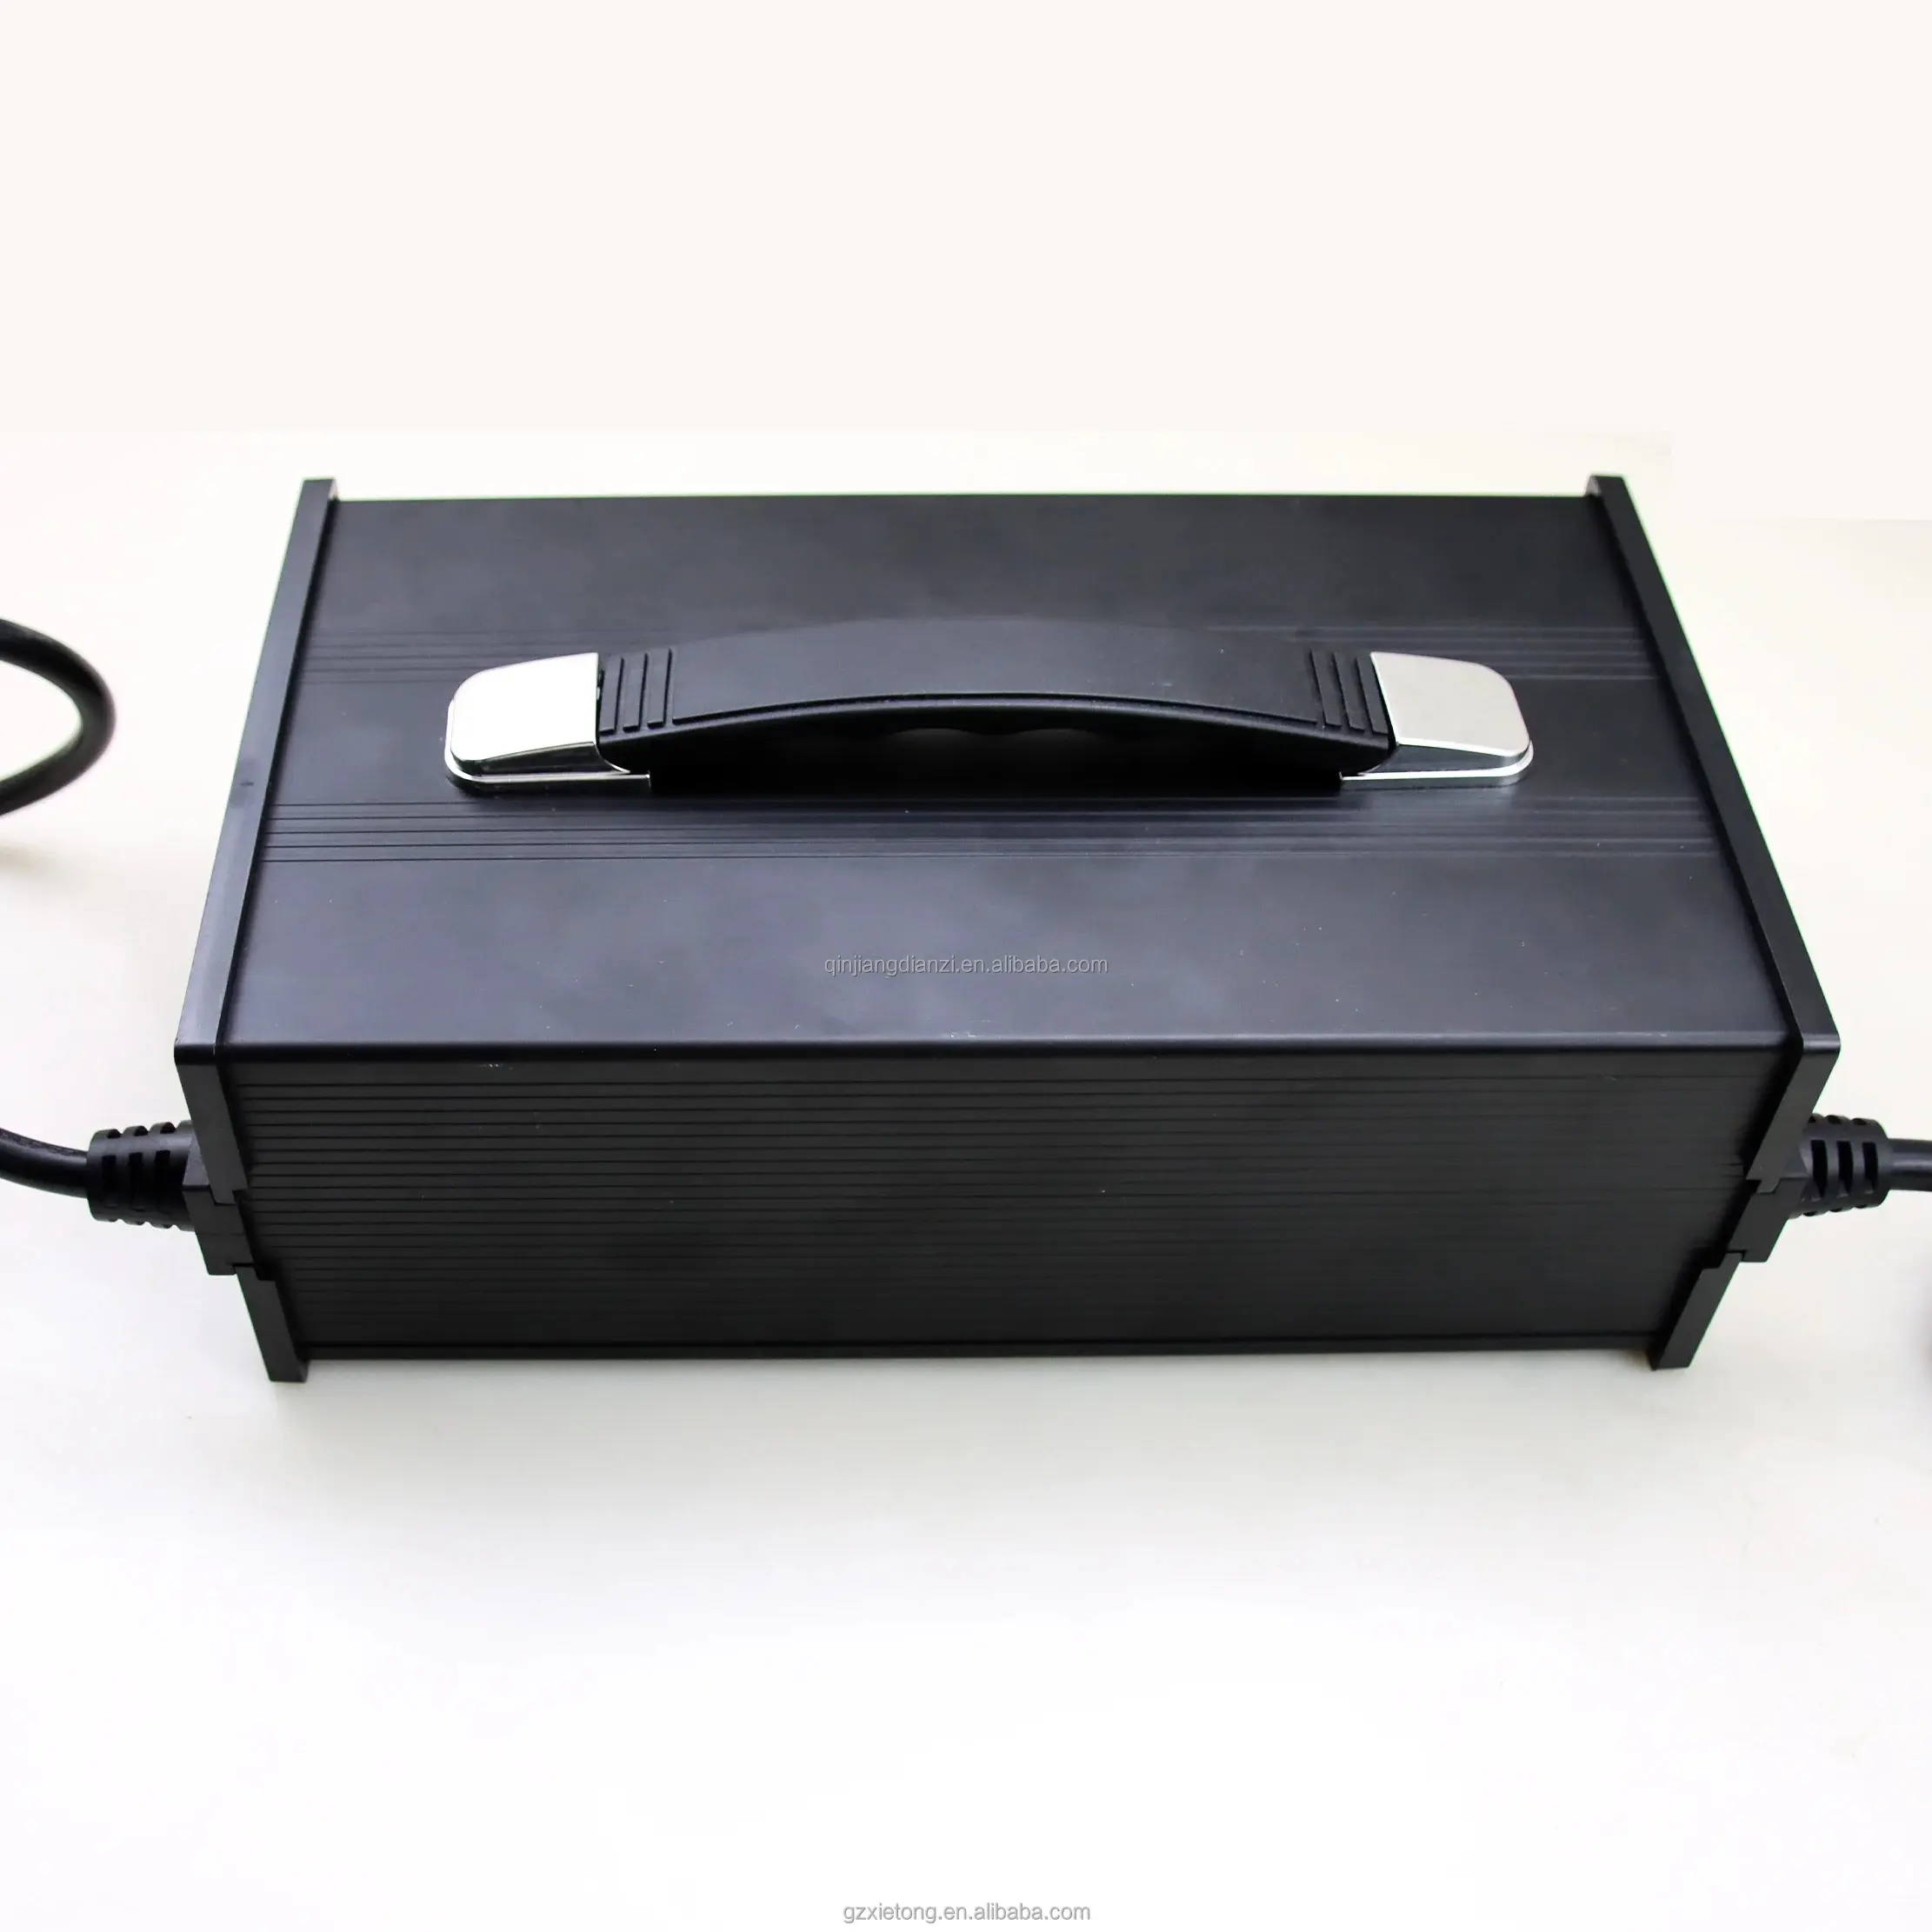 72V30A high-power lead-acid lithium battery charger, vehicle waterproof, fully sealed, fast charging with high quality